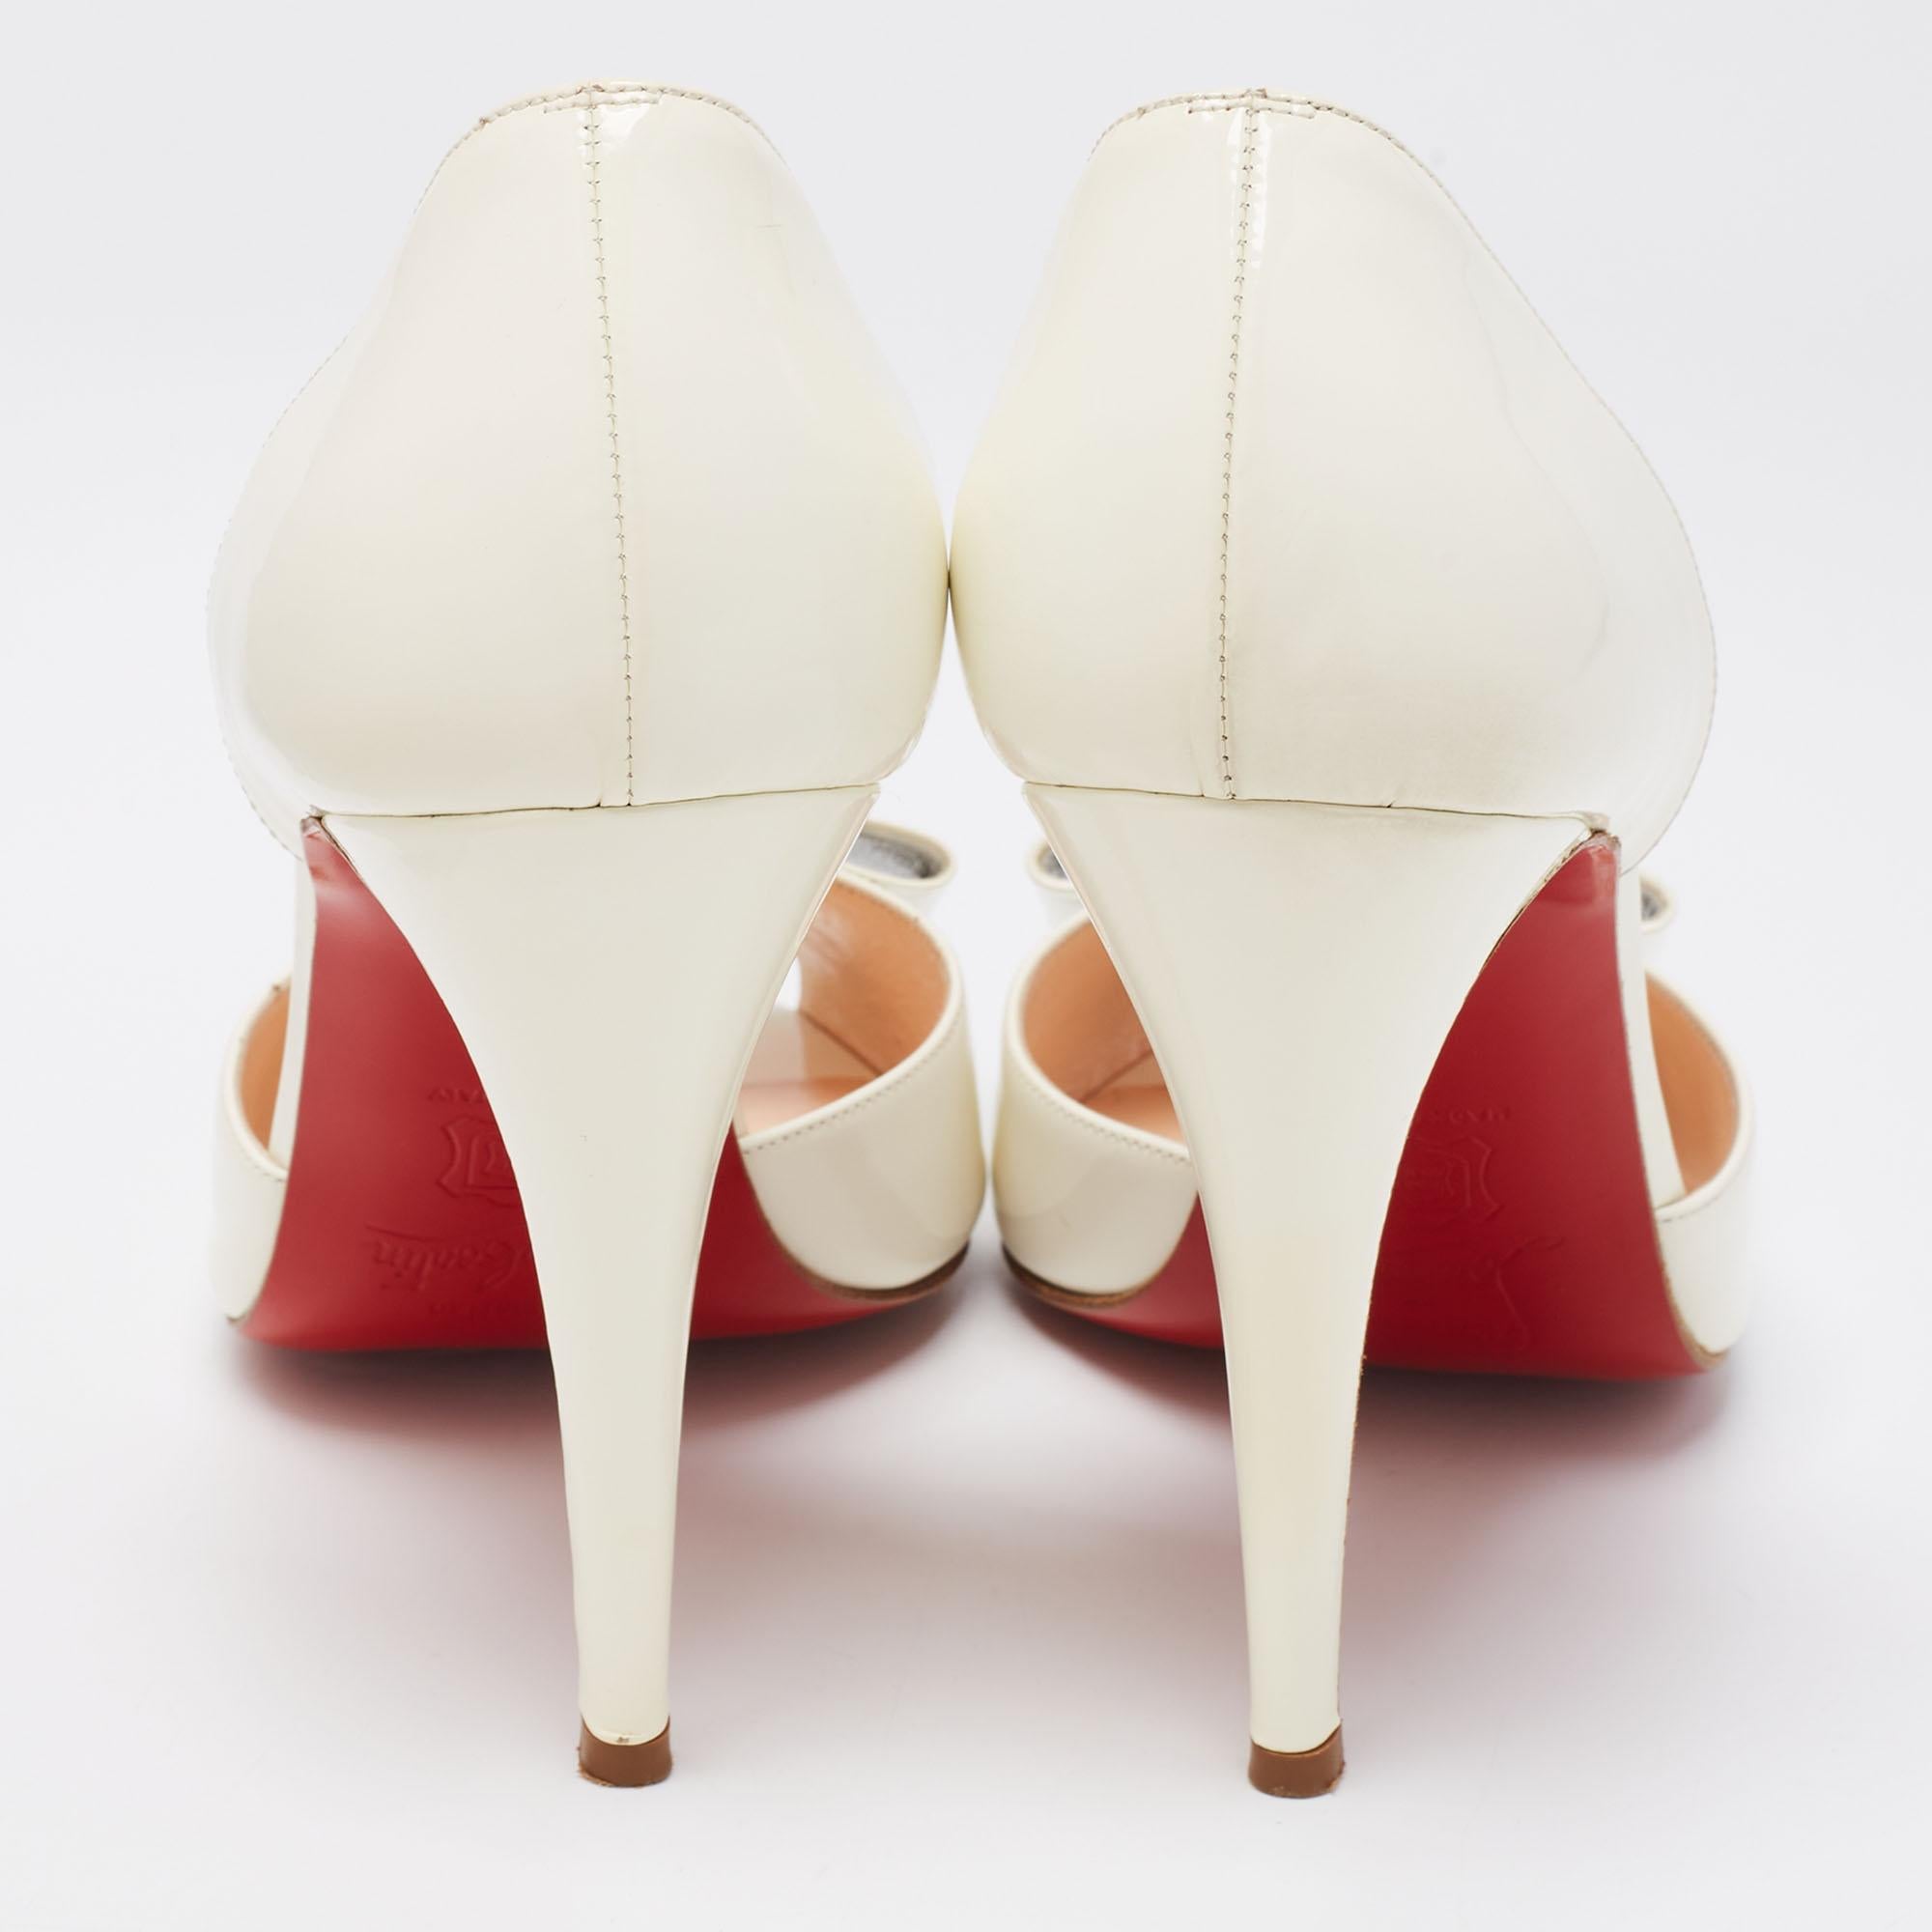 Christian Louboutin Off-White Patent Leather Jolie-Noeud Peep-Toe Pumps Size 41 1